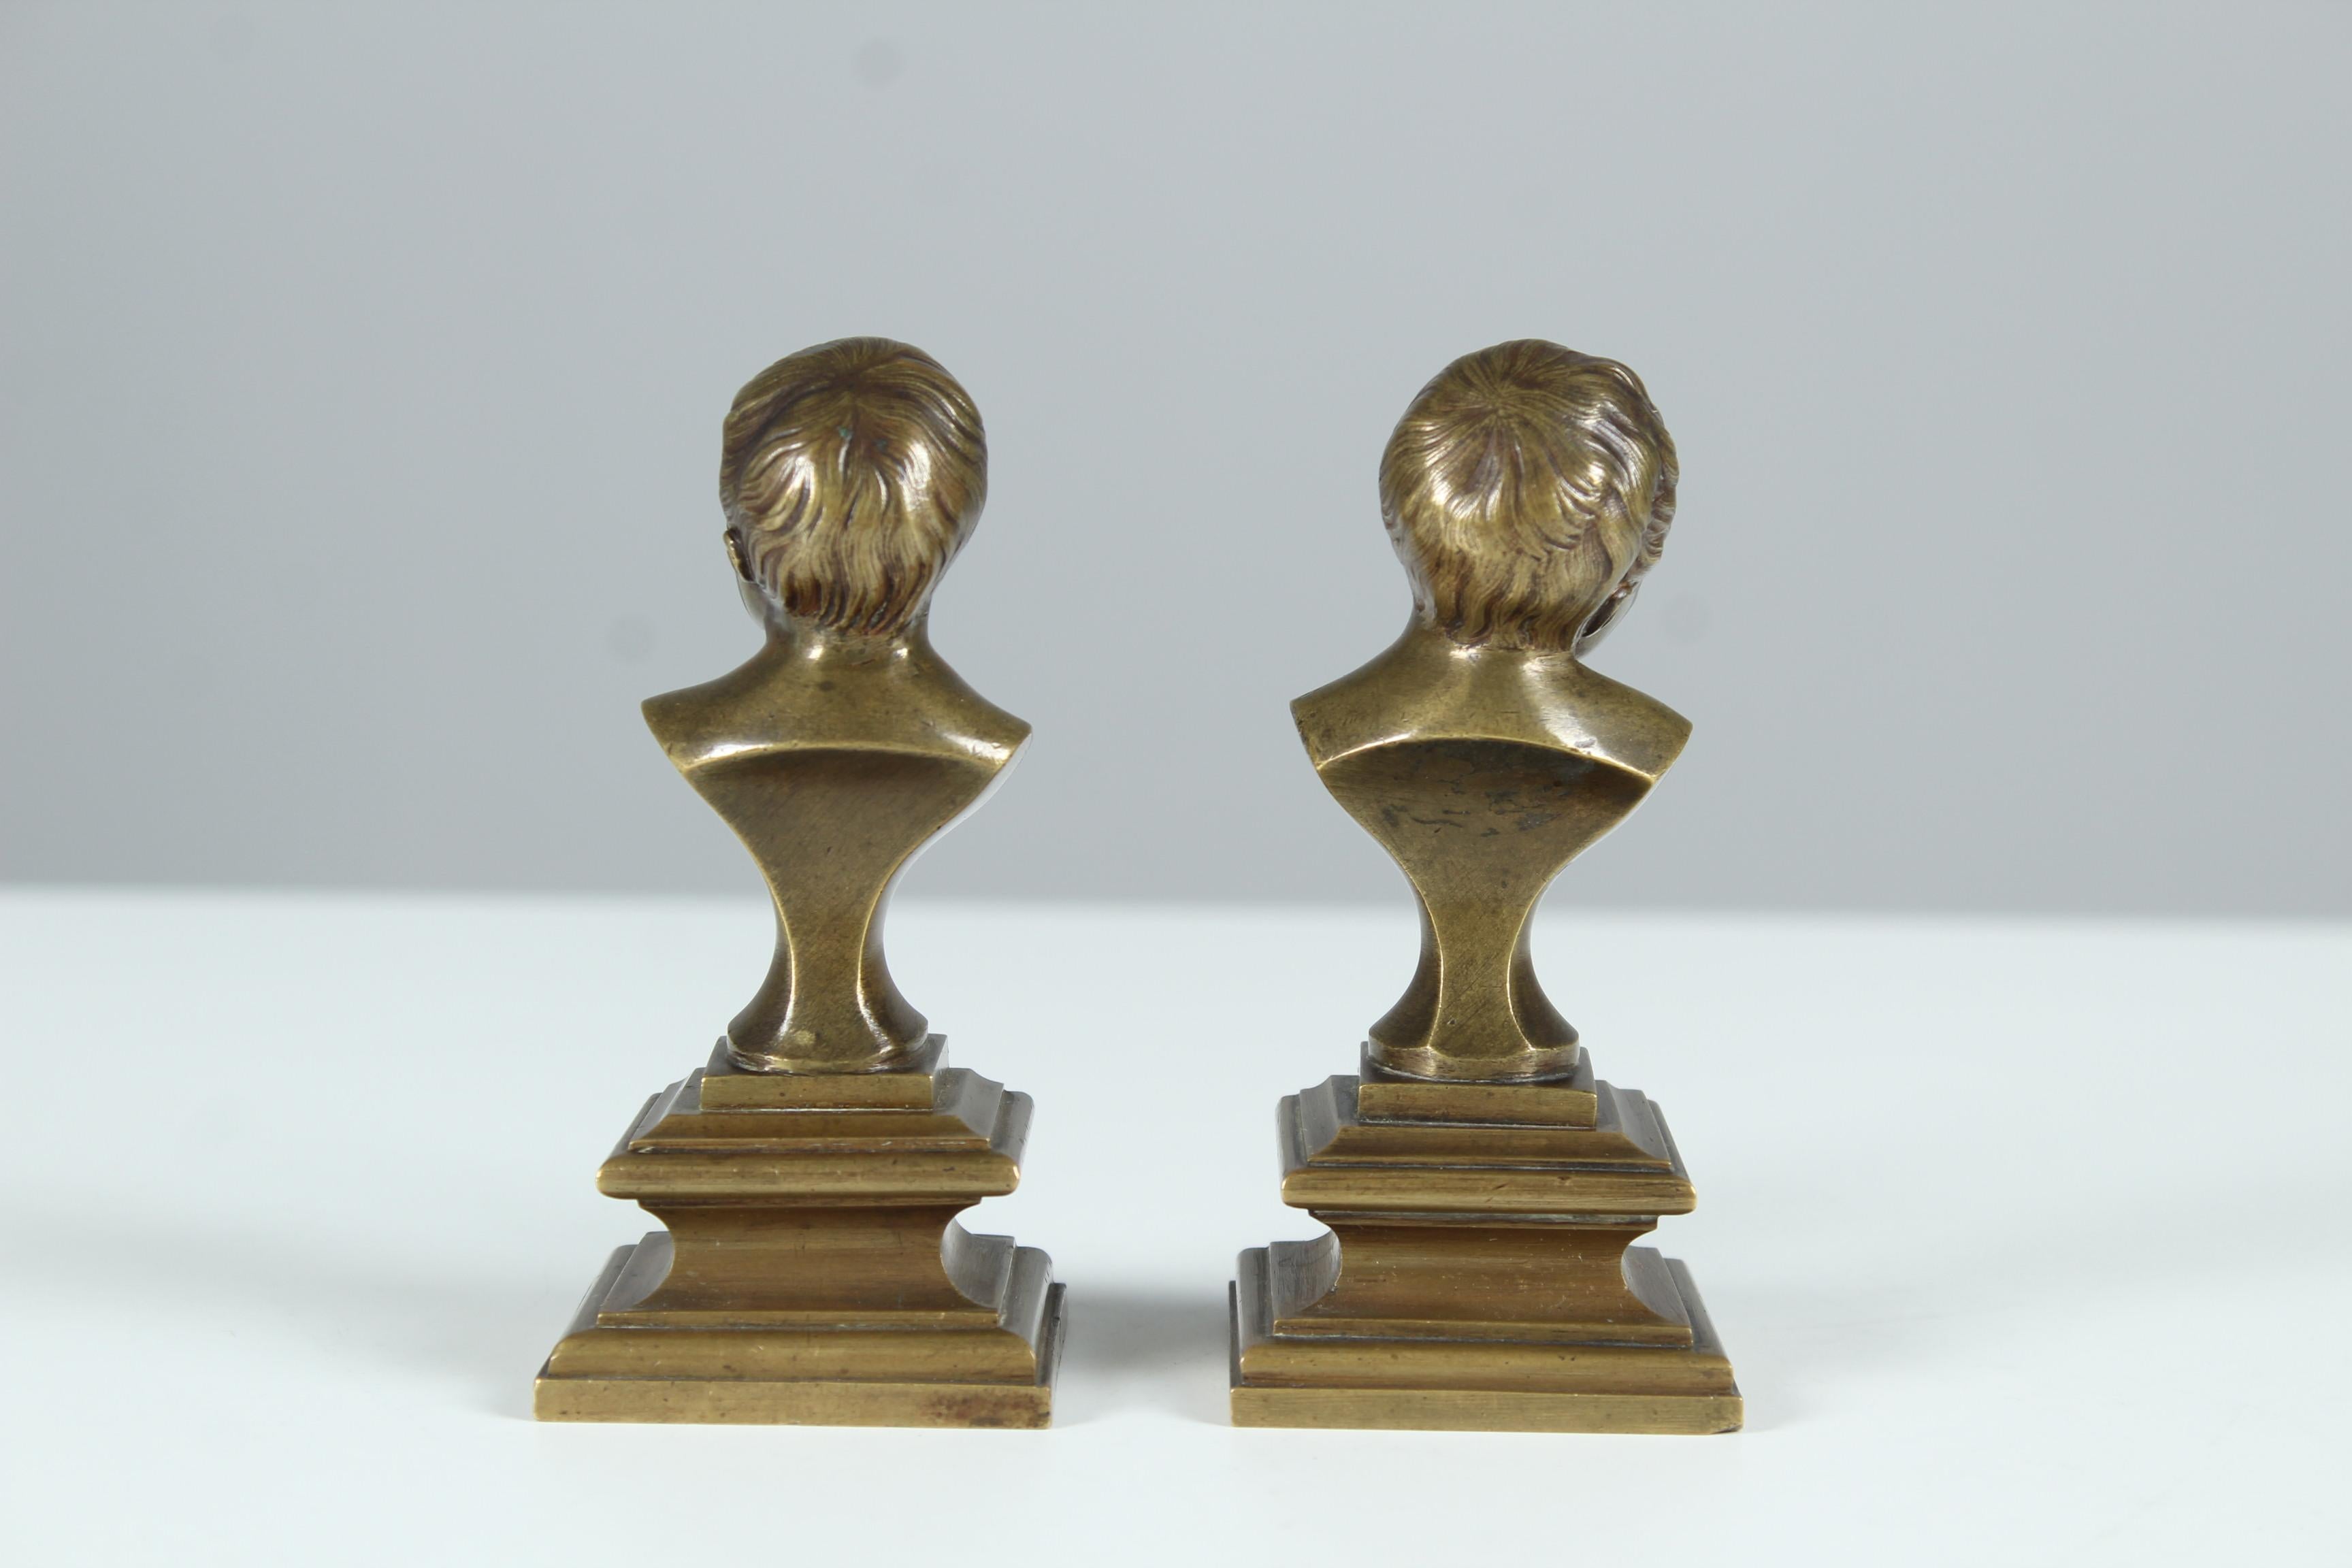 Polished Antique Pair of Miniature Bronze Busts, Children Laughing and Crying, Late 19th For Sale